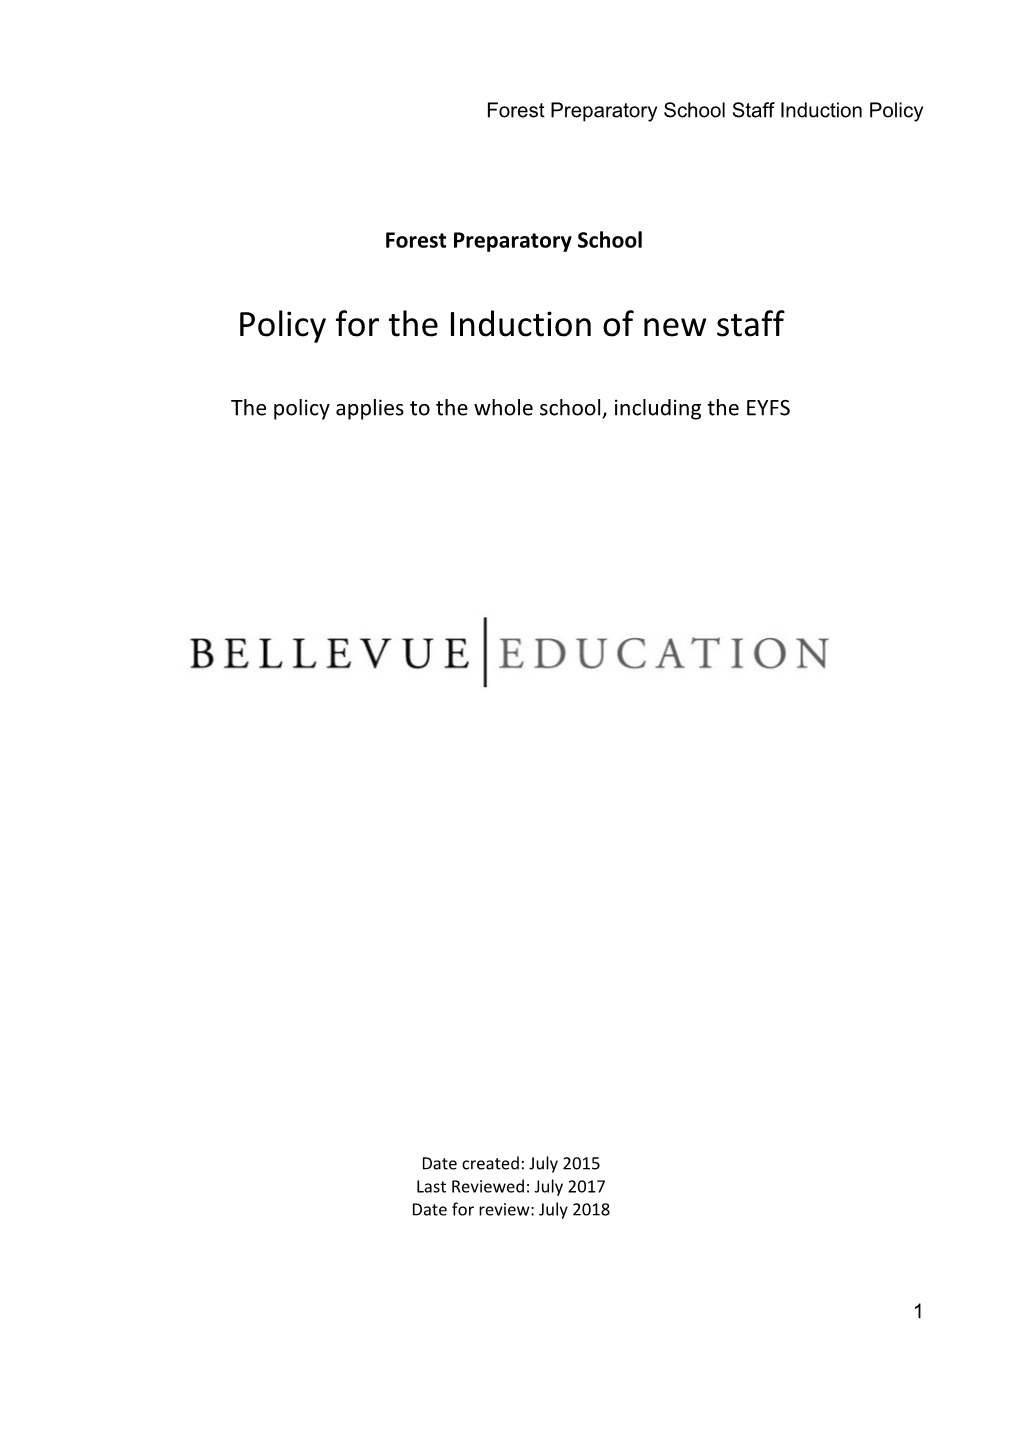 Forest Preparatory School Staff Induction Policy